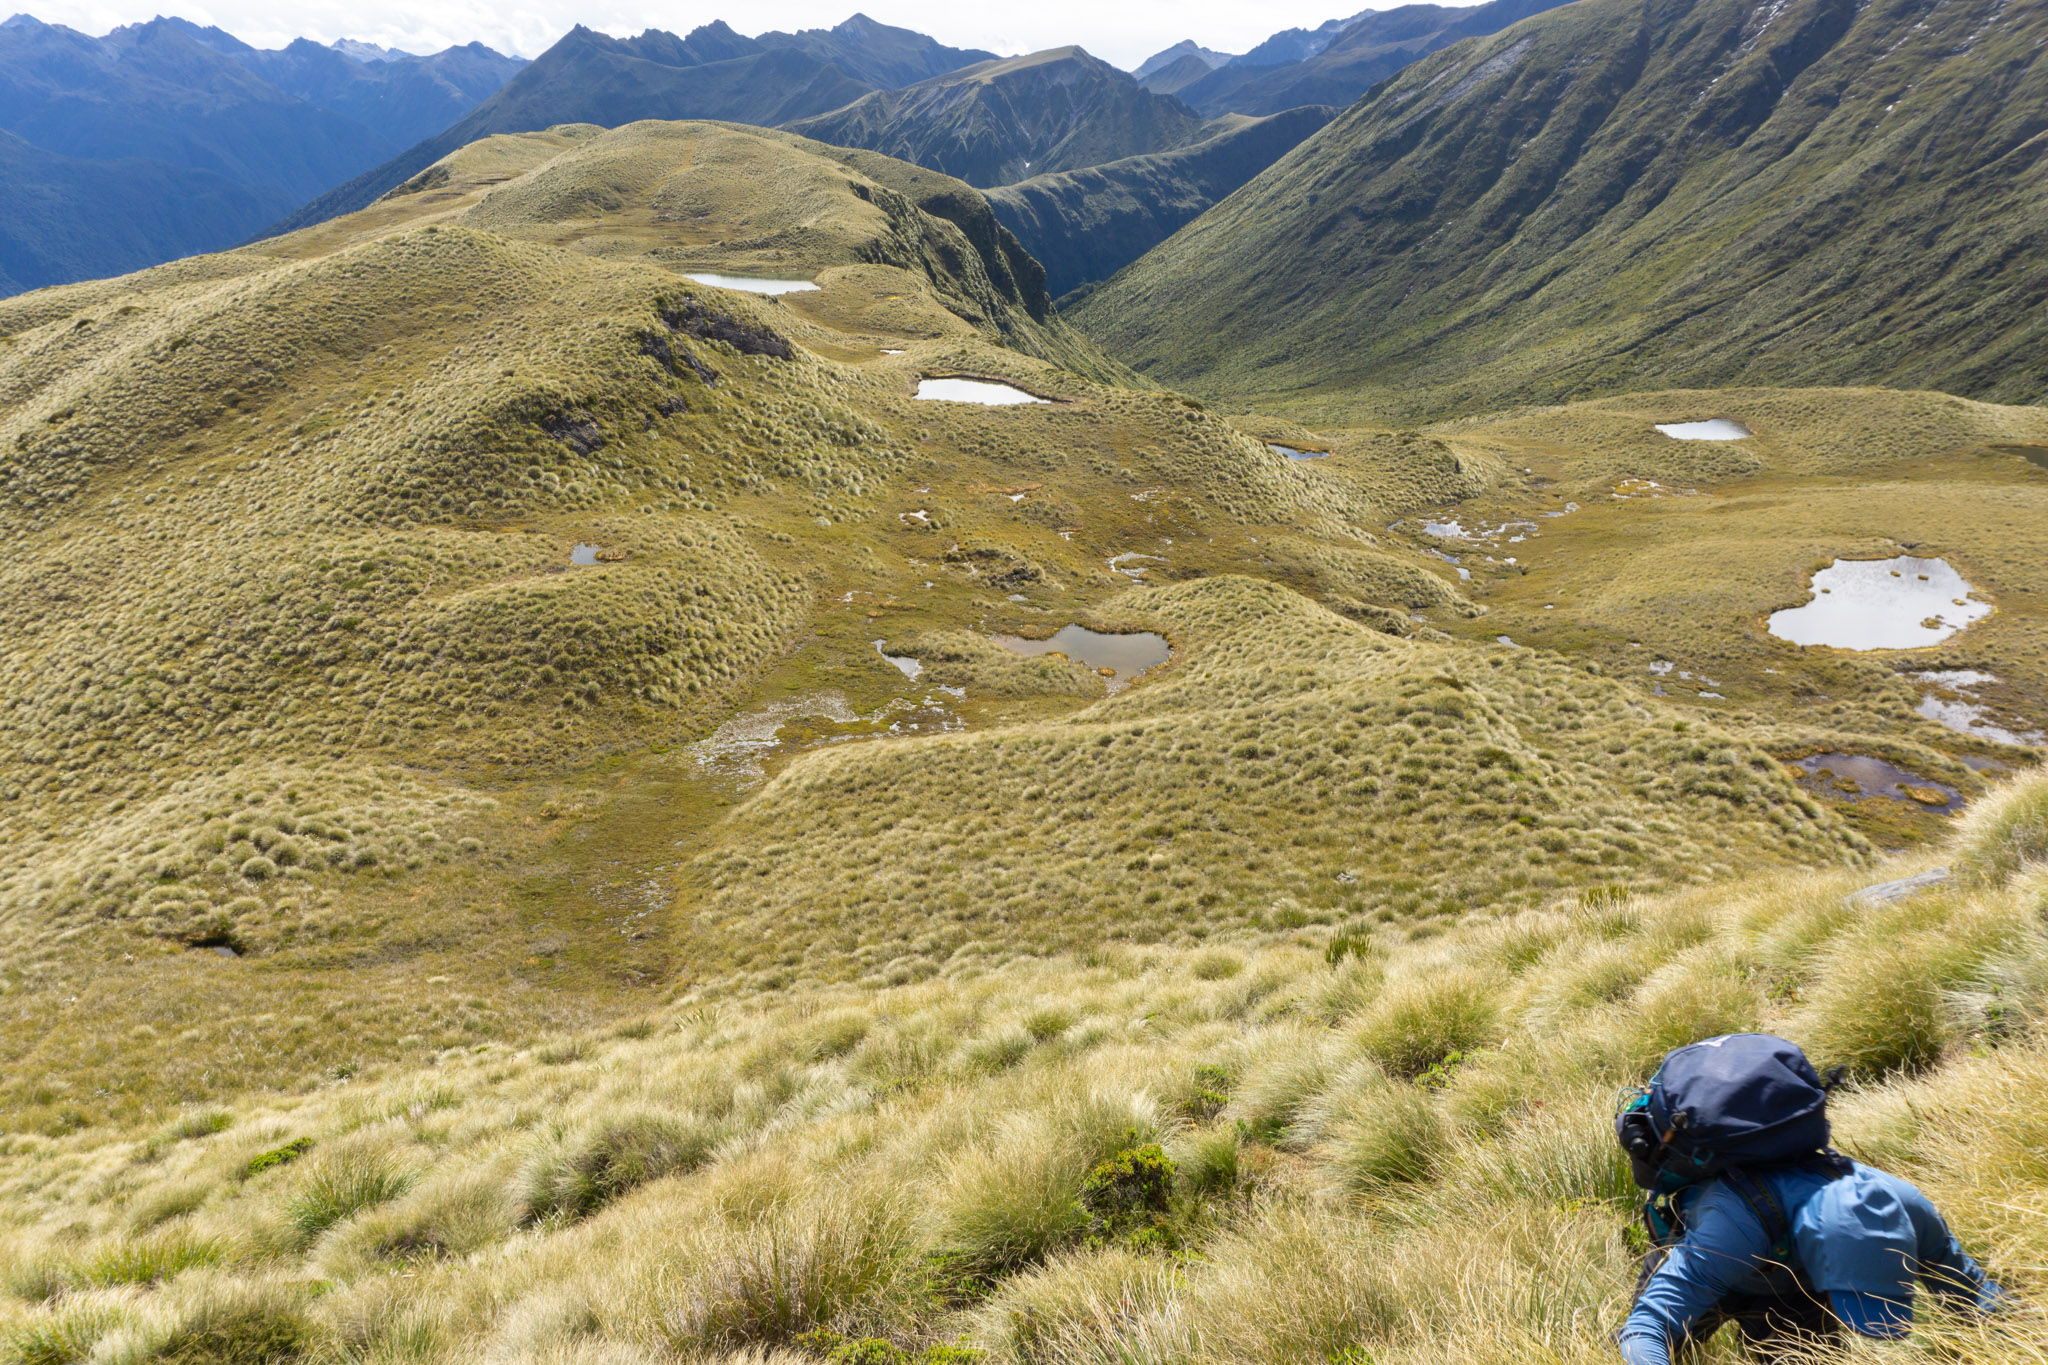 Man climbing up tussocks with the Mt Burns Tarns in the background near Borland